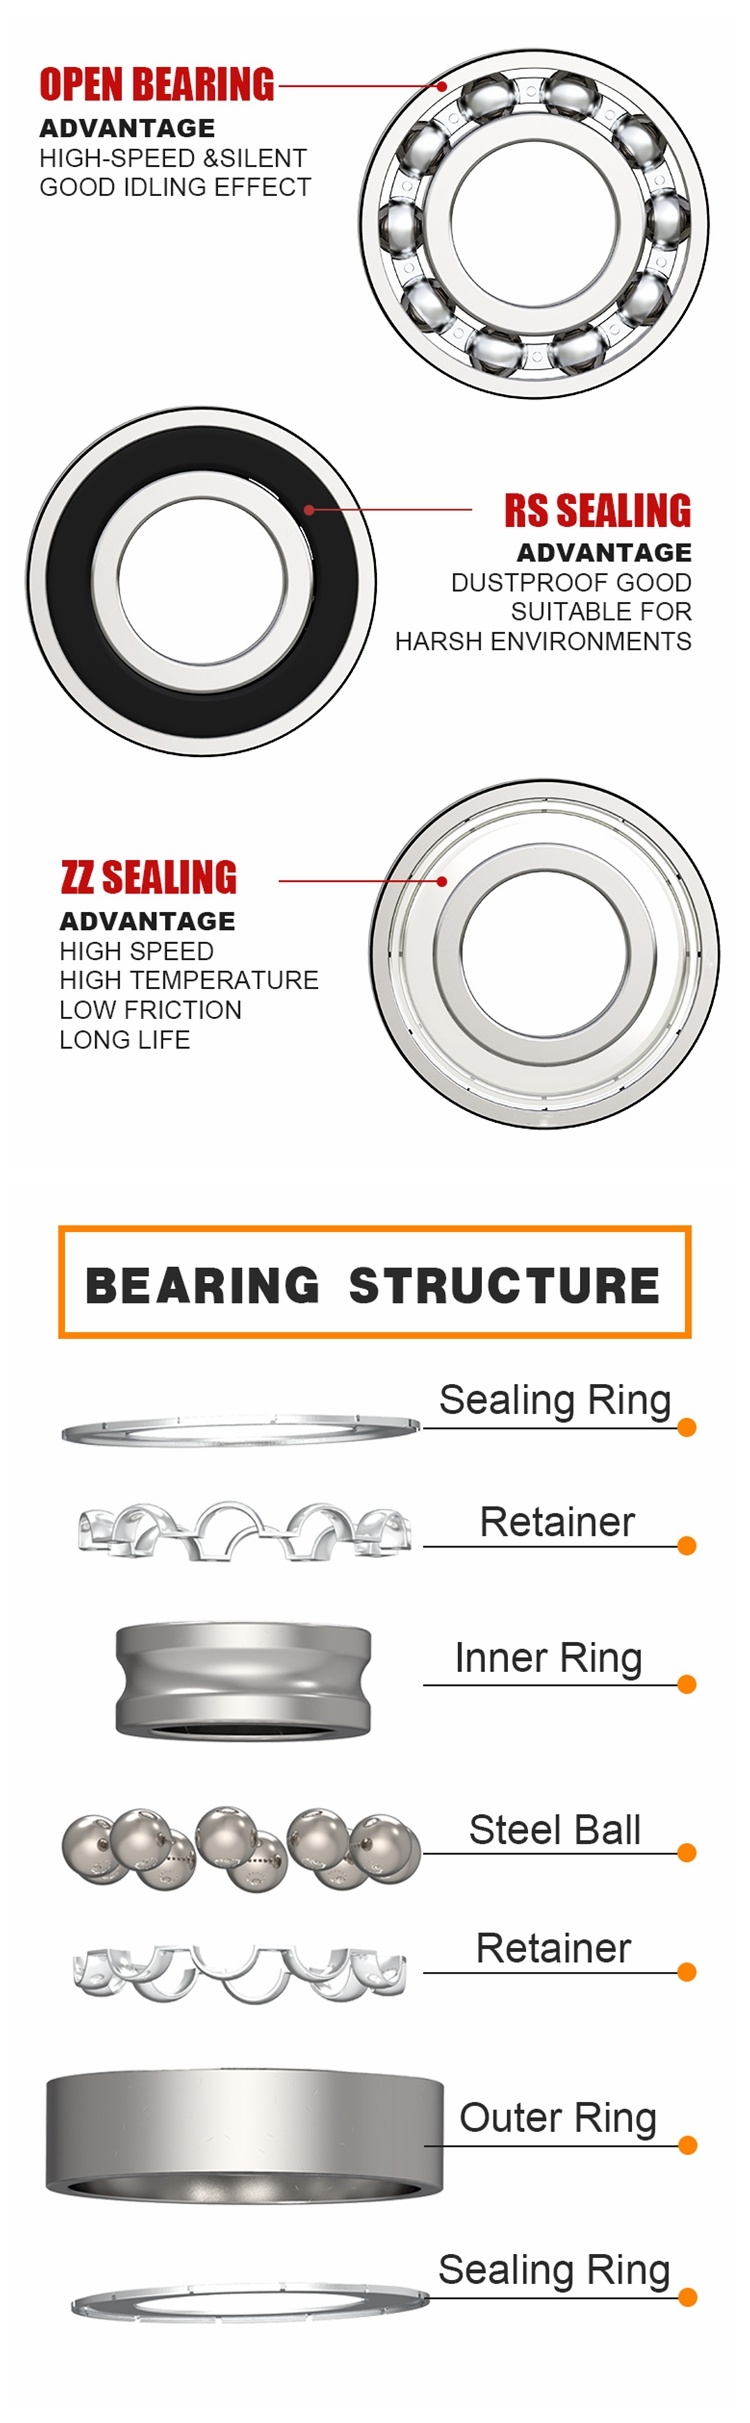 High Precision Bicycle Bearing Steel Cover 16004 Zz Ball Bearings